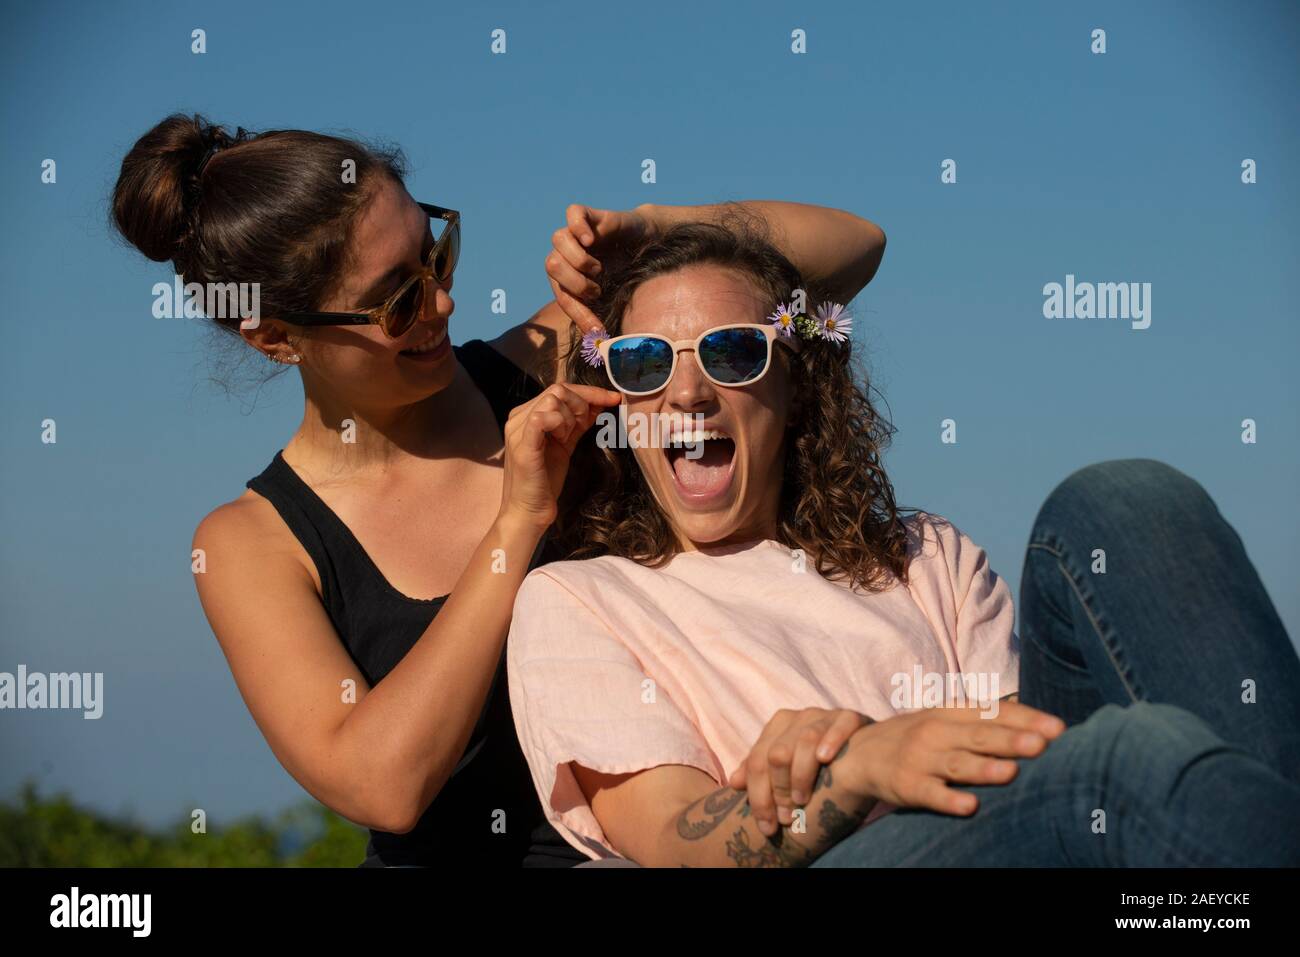 Two women laughing outside on a sunny day. Stock Photo